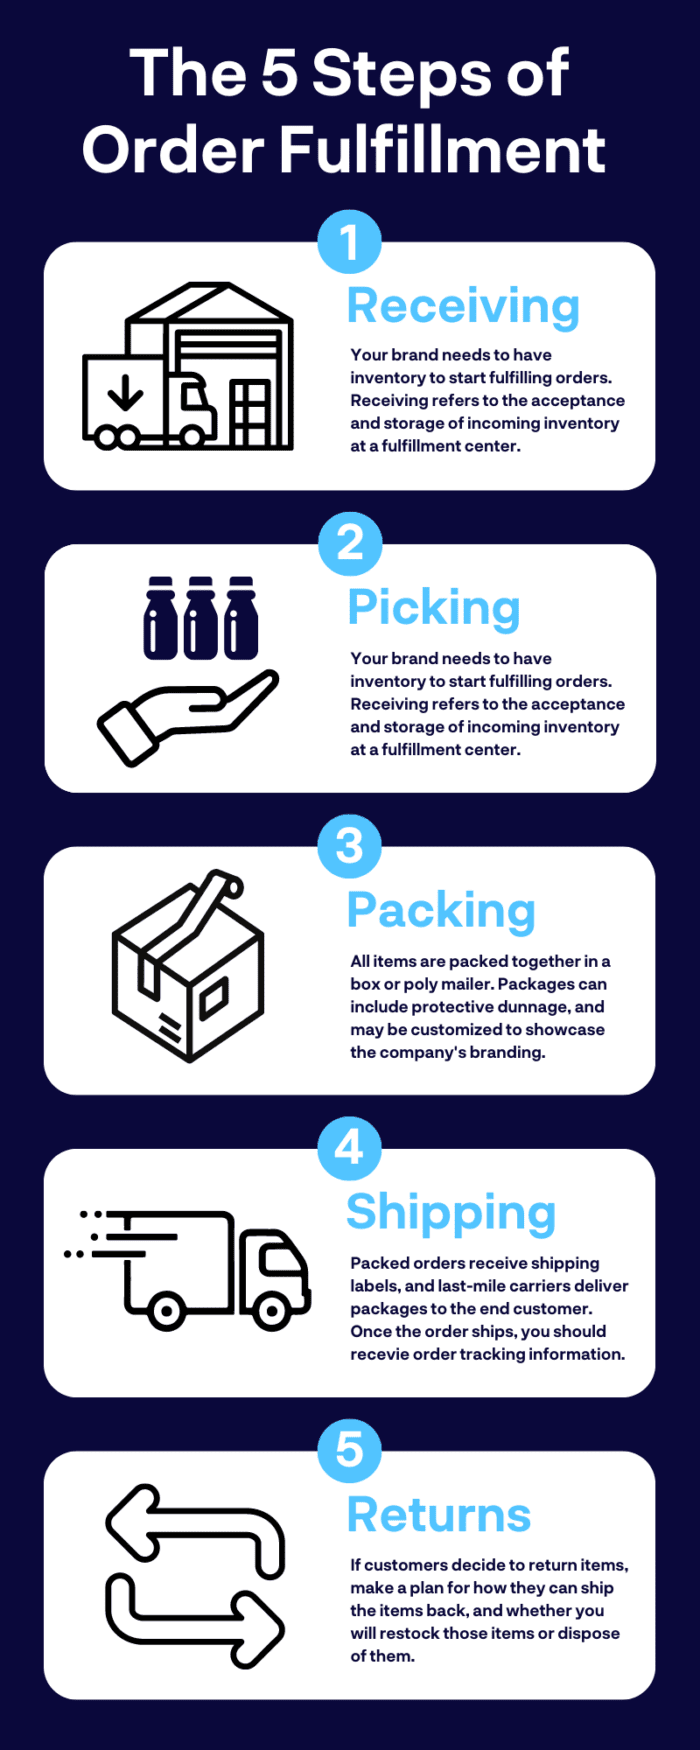 What Does Expedited Shipping Mean? The 5 Most Common Questions